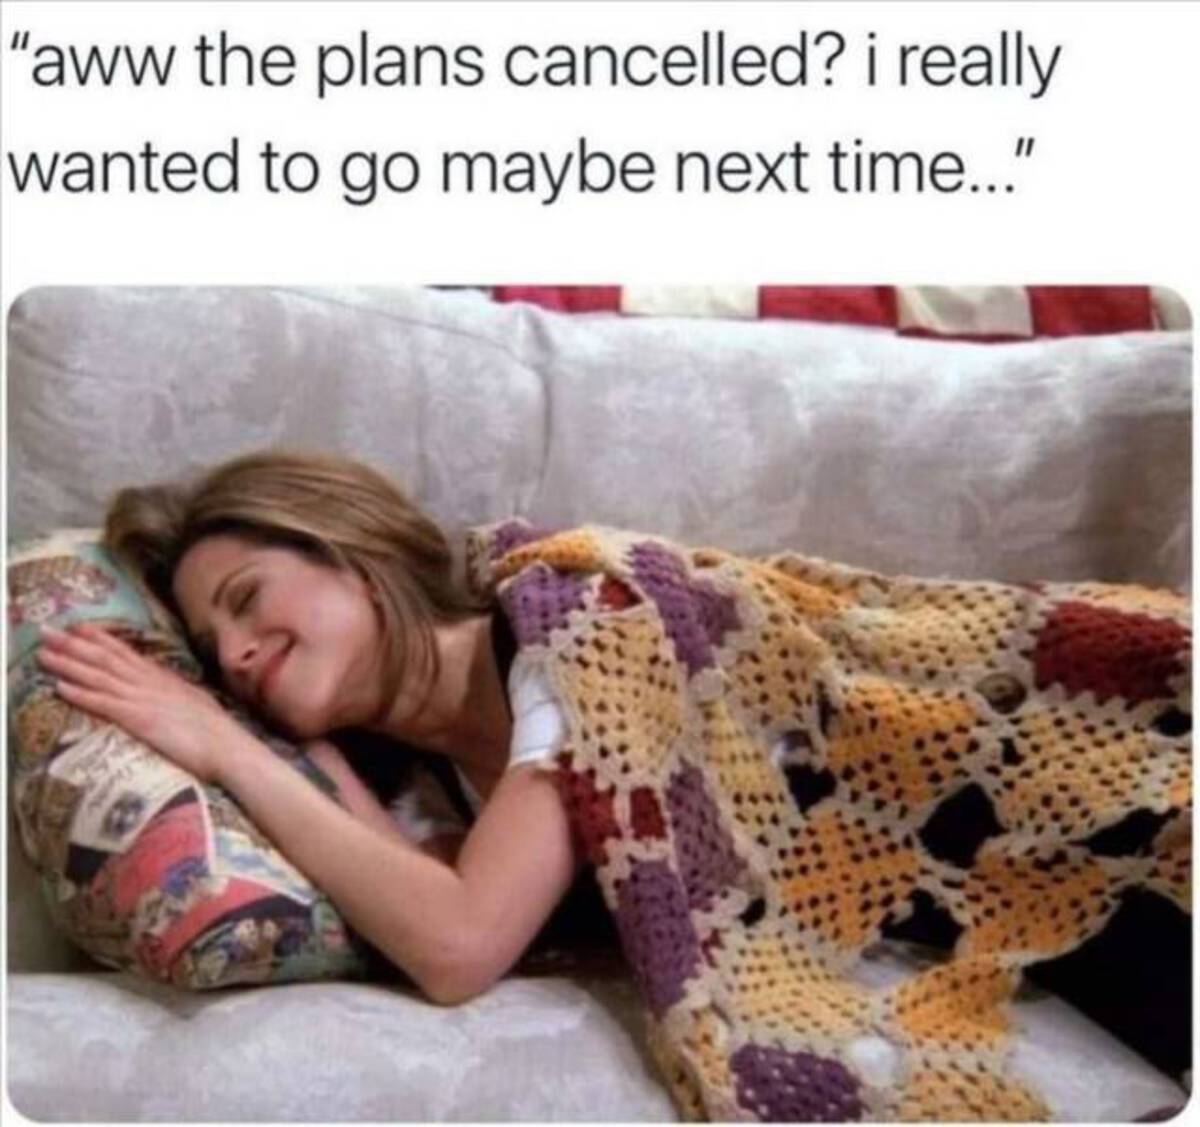 plans get cancelled meme - "aww the plans cancelled? i really wanted to go maybe next time..."